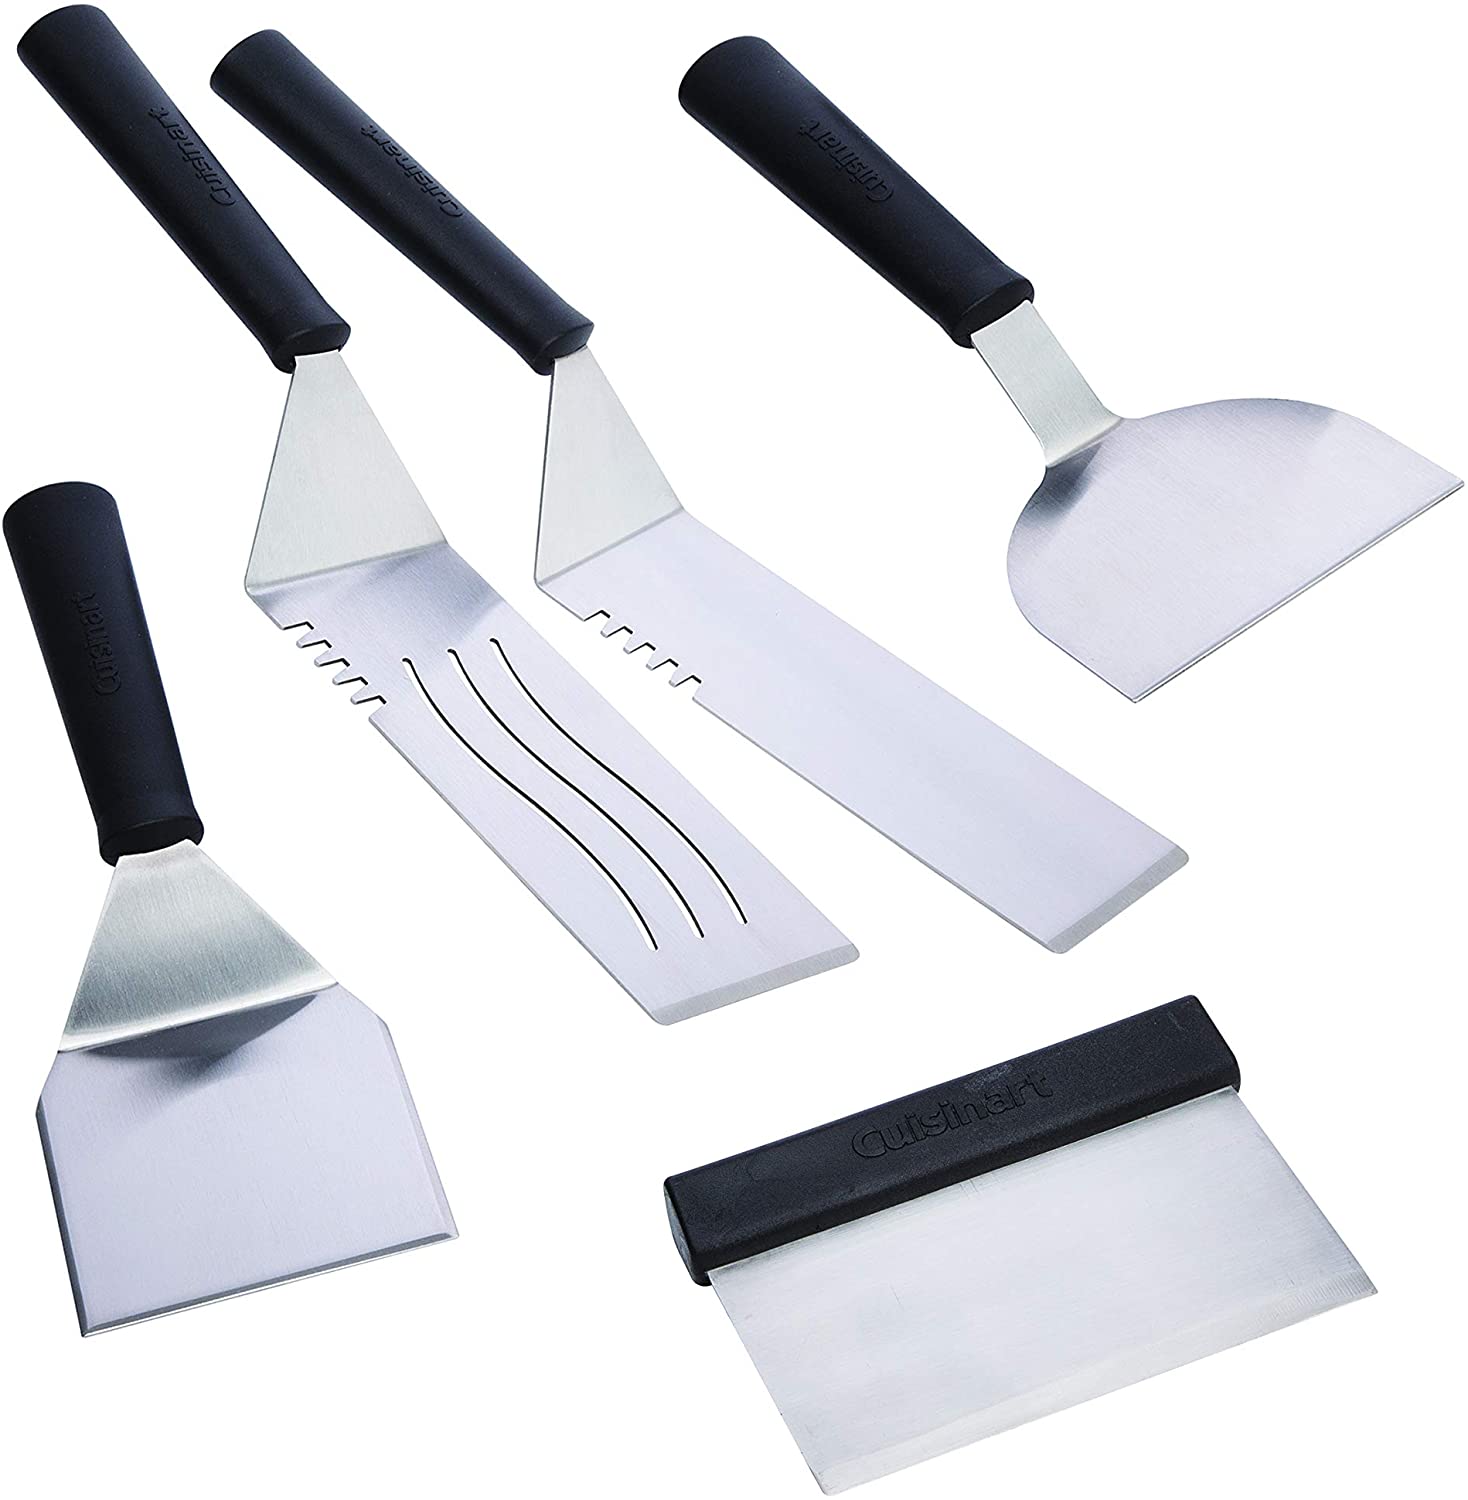 5-Piece Cuisinart Stainless Steel  Griddle Spatula Set (CGS-509) $15.40 + Free Shipping w/ Prime or $25+